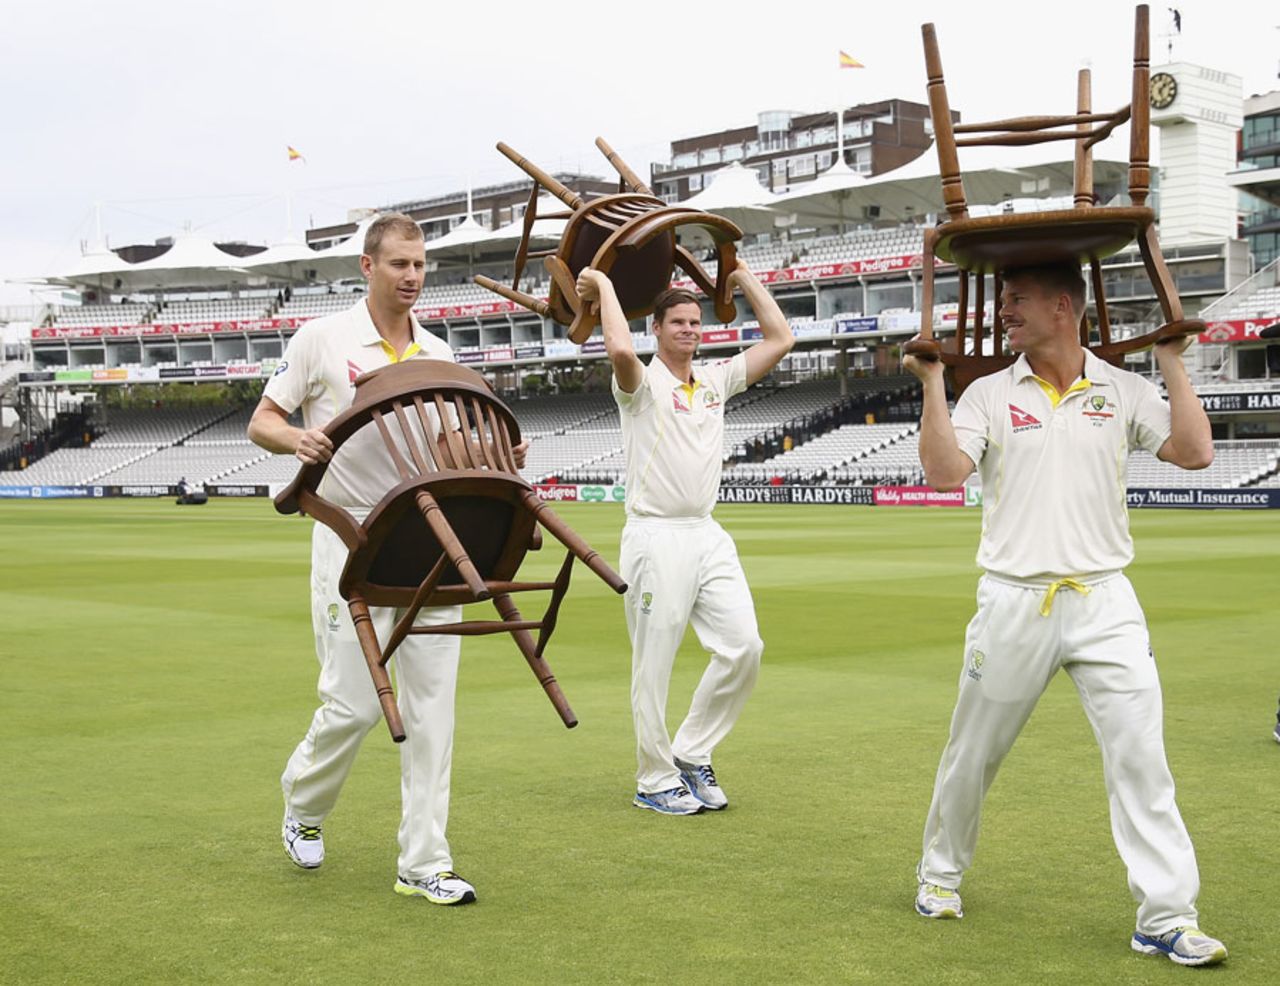 The Australia players had to carry their own chairs, England v Australia, 2nd Investec Ashes Test, Lord's, July 15, 2015